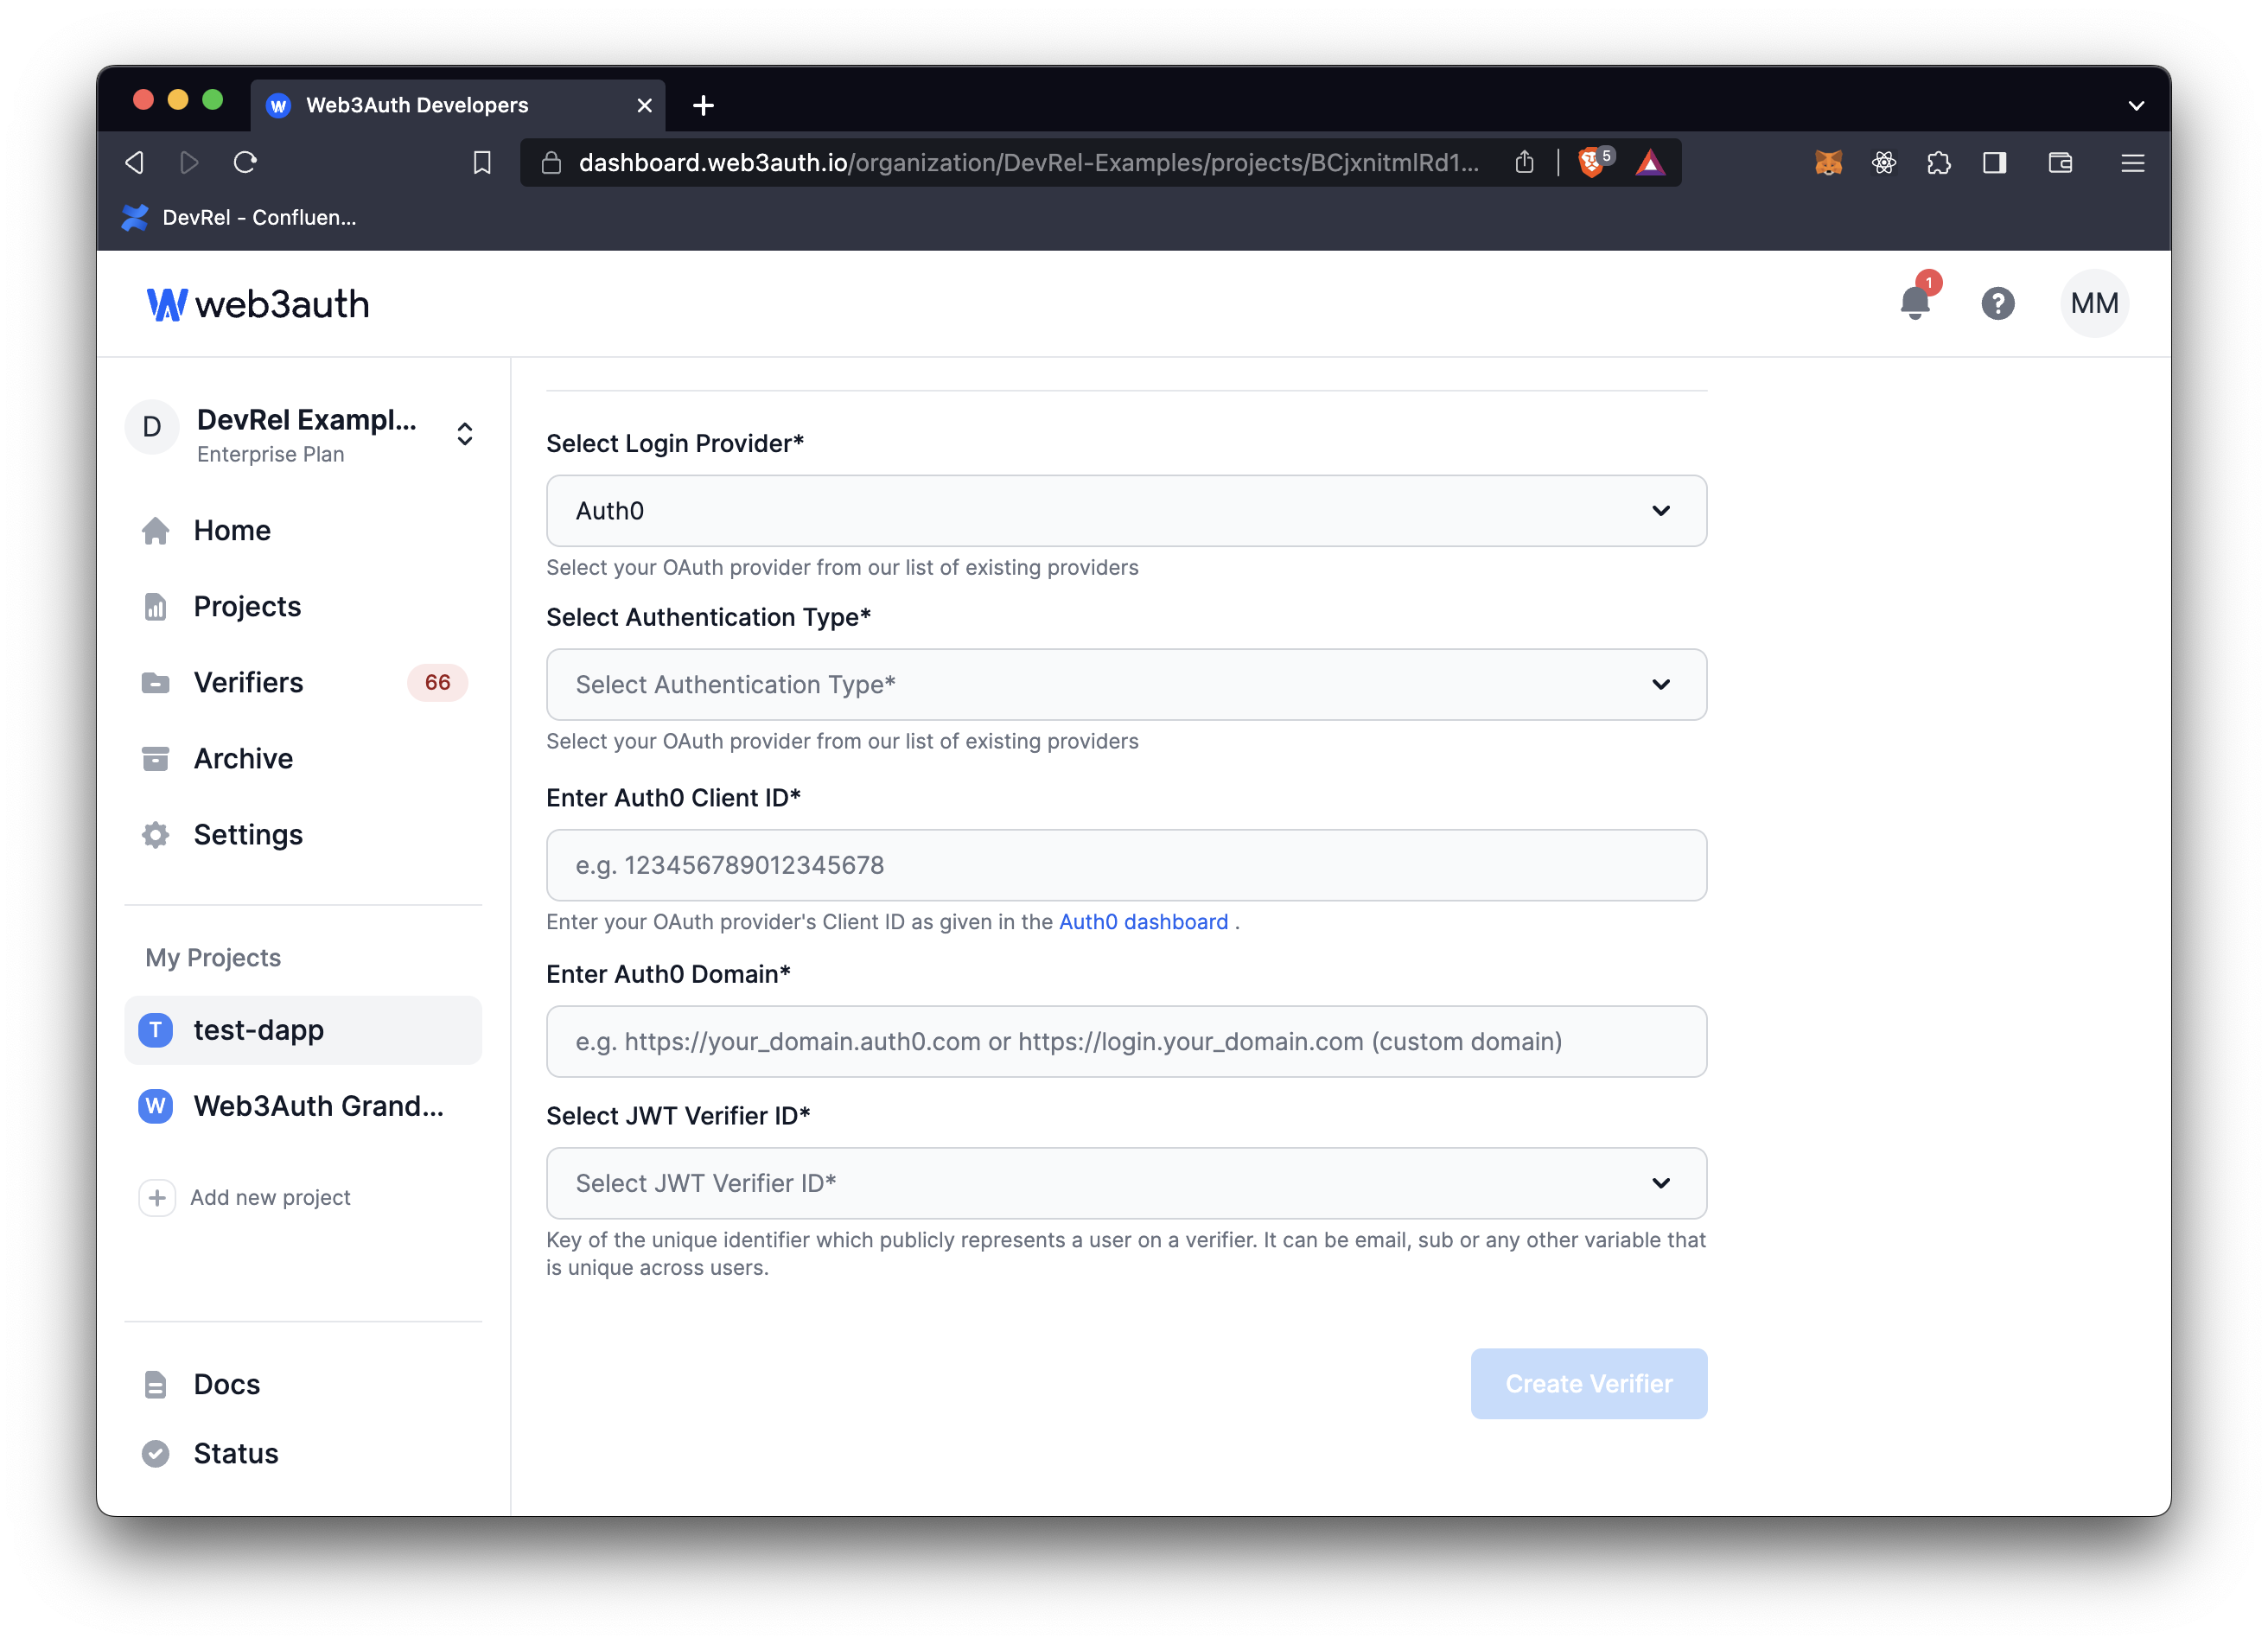 LINE - Auth0 Client ID and Auth0 Domain on Web3Auth Dashboard